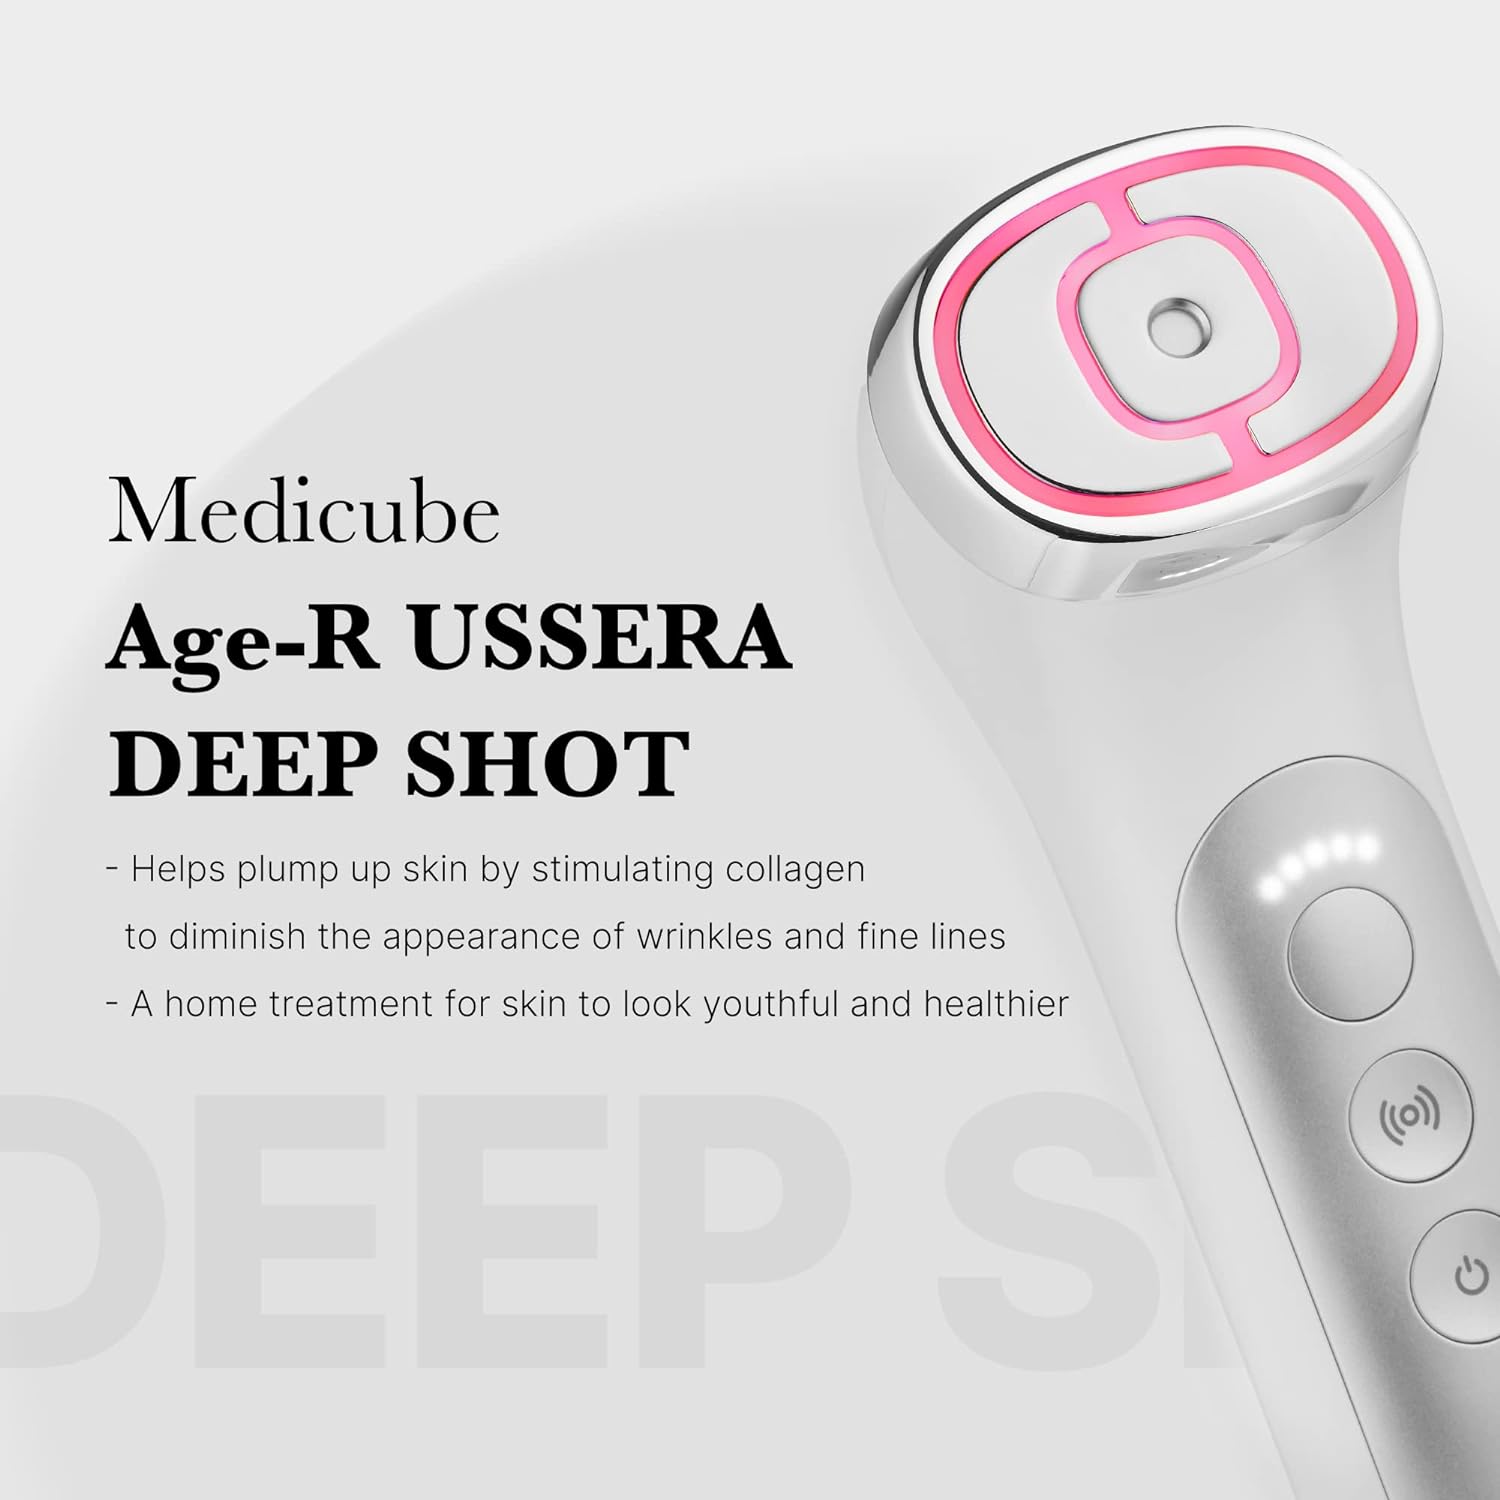 A depiction of Medicube AGE-R Ussera Deep Shot, a skincare remedy formulated to combat aging effects.